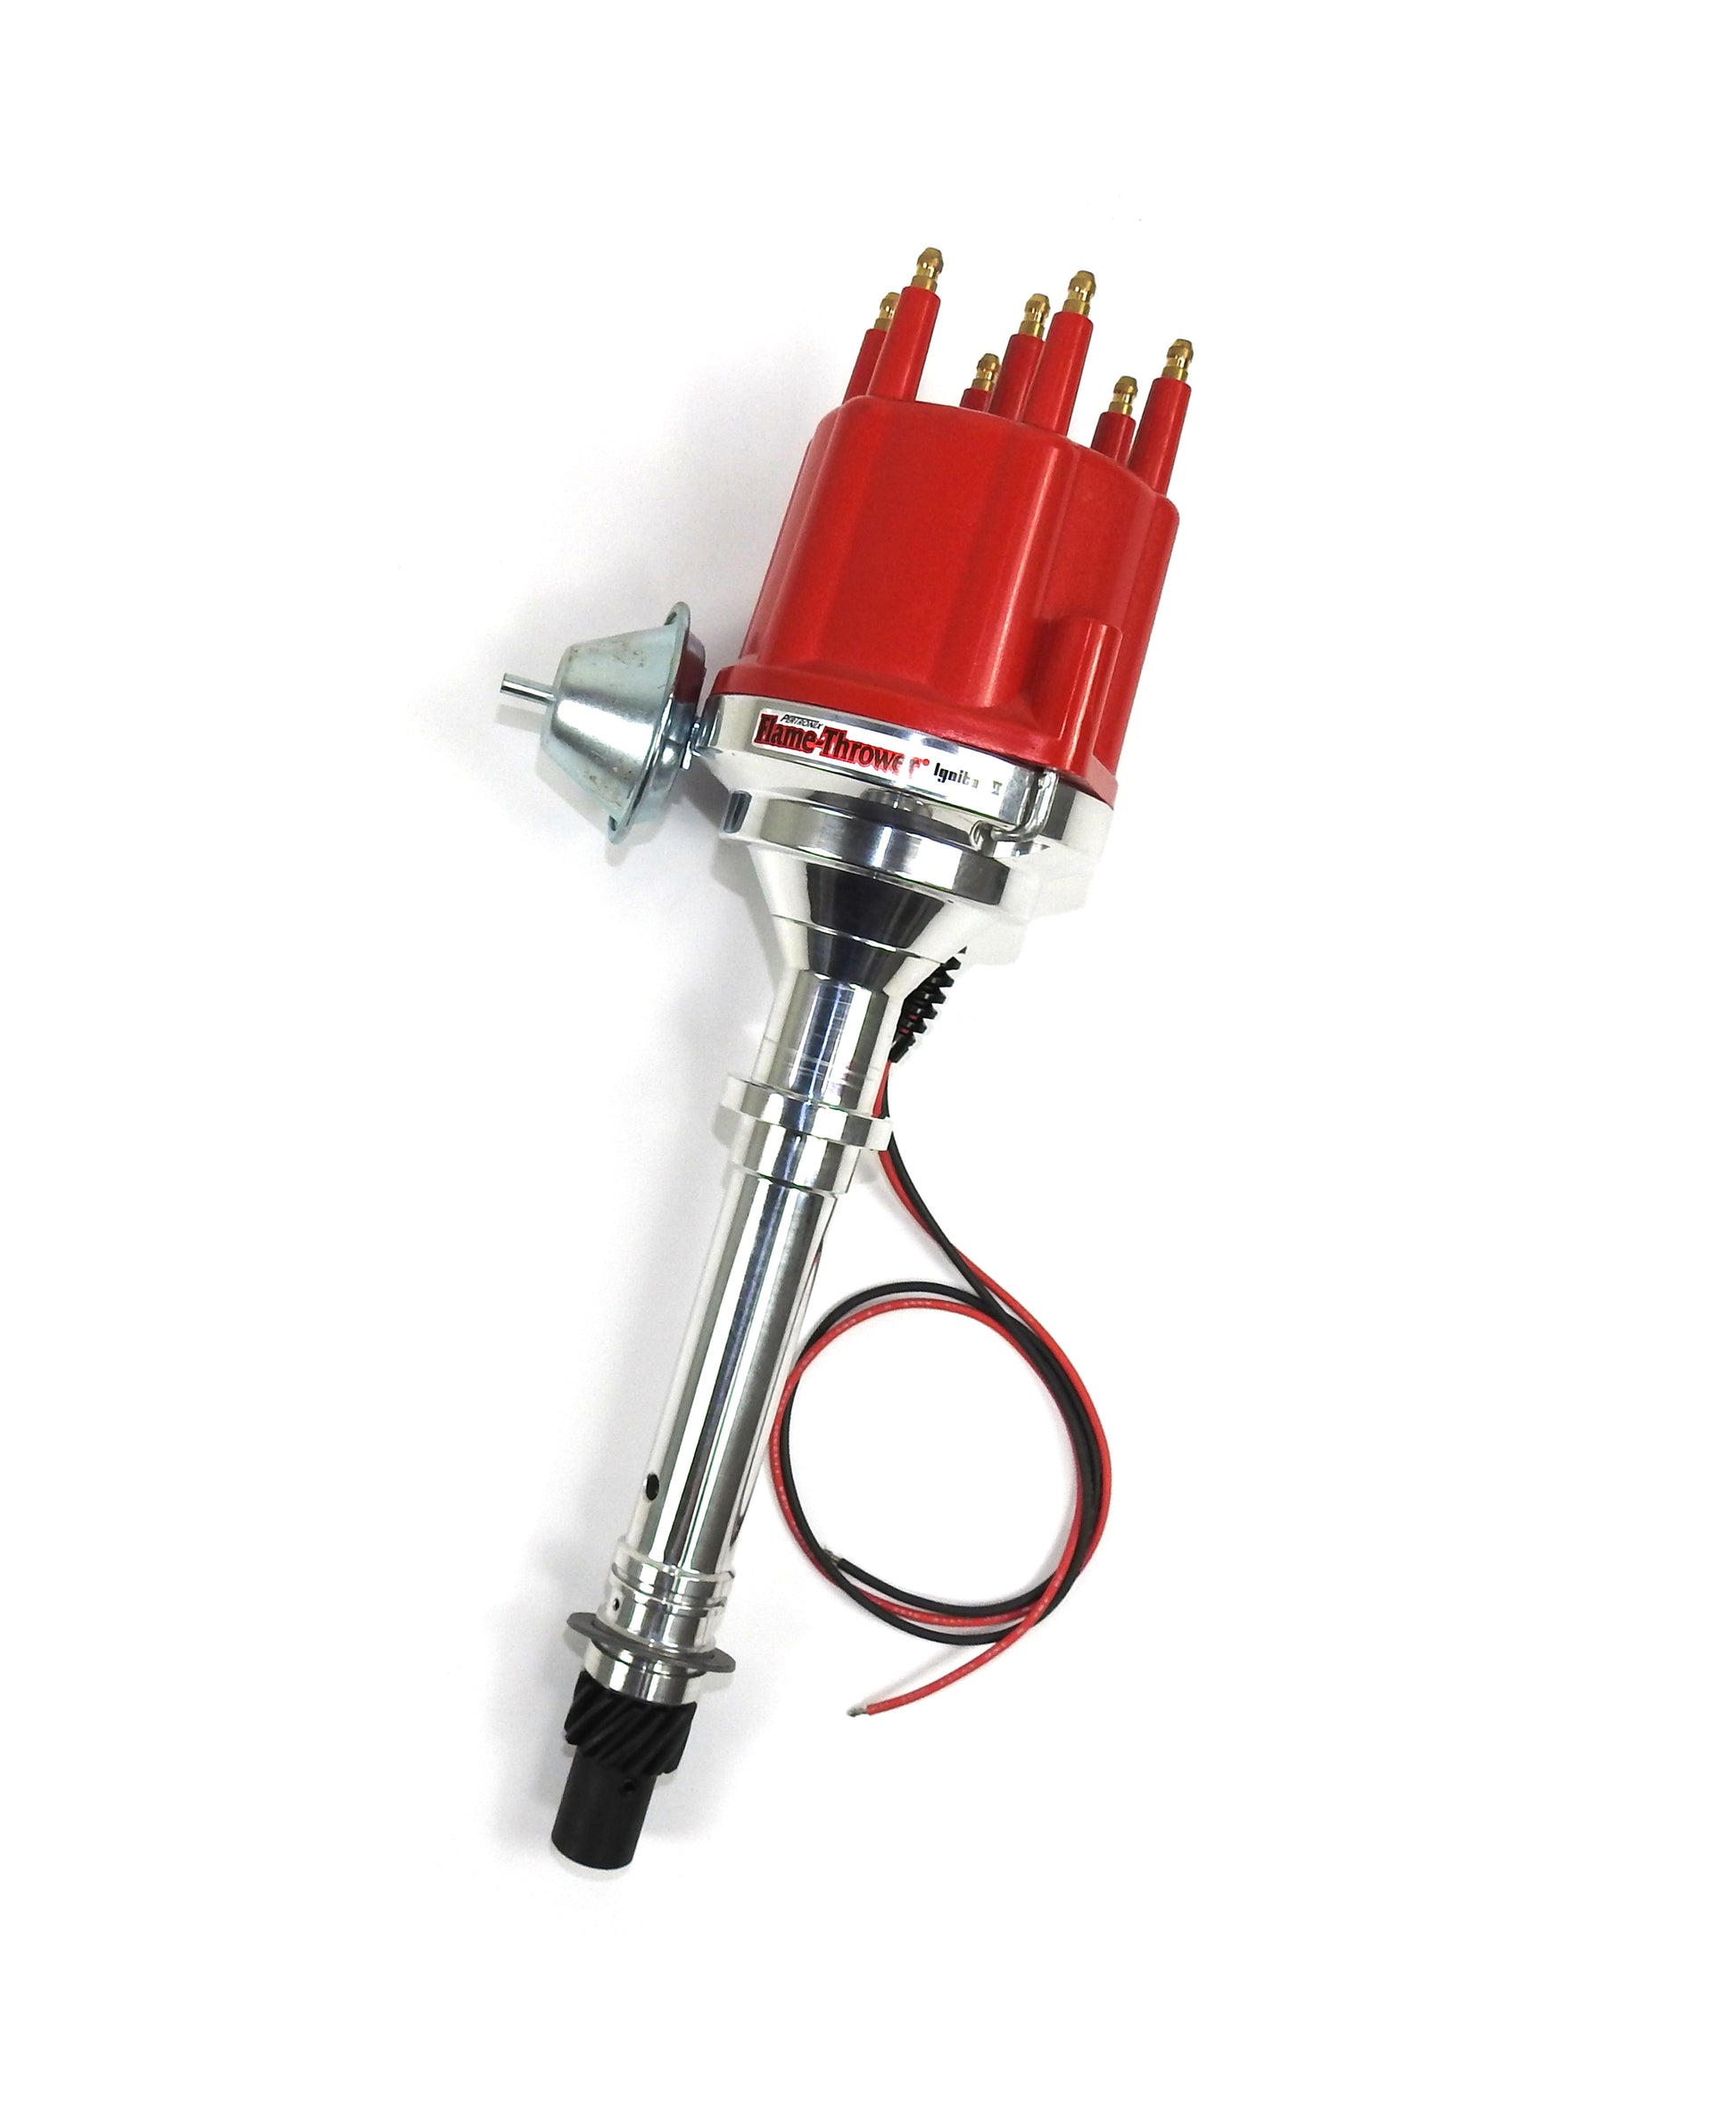 PerTronix D107711 Flame-Thrower Electronic Distributor Billet GM 90 degree v6 Plug and Play with Ignitor II Technology Vacuum Advance Male Red Cap